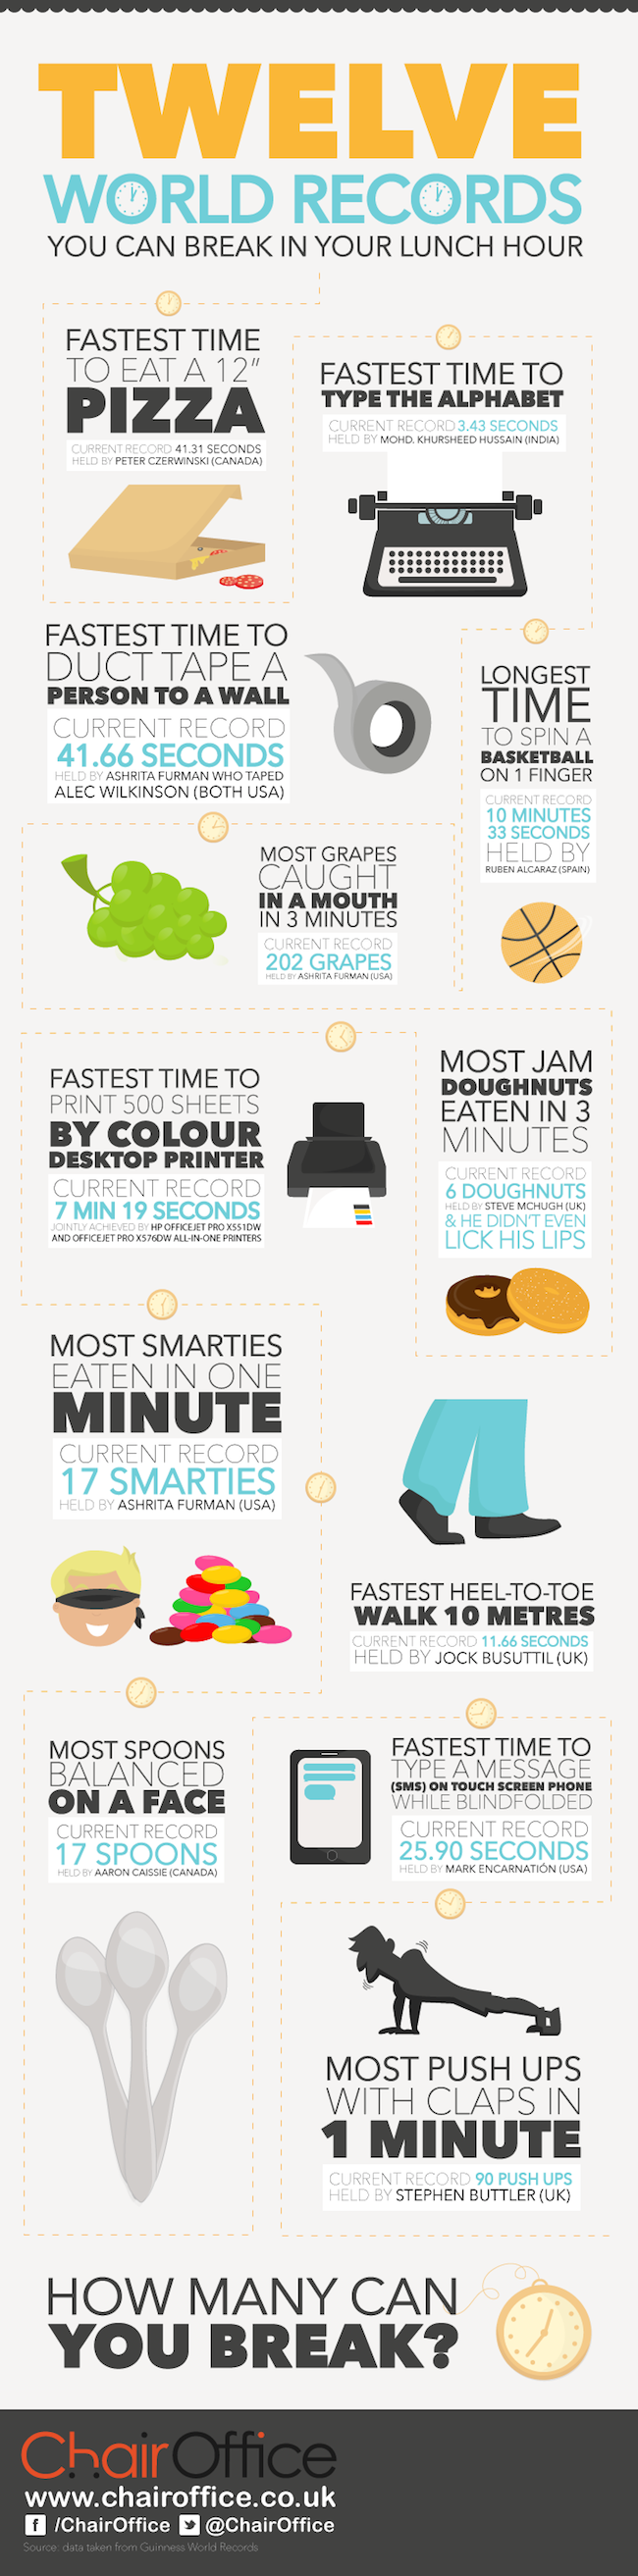 12 World Records You Can Break During Lunch [Infographic]